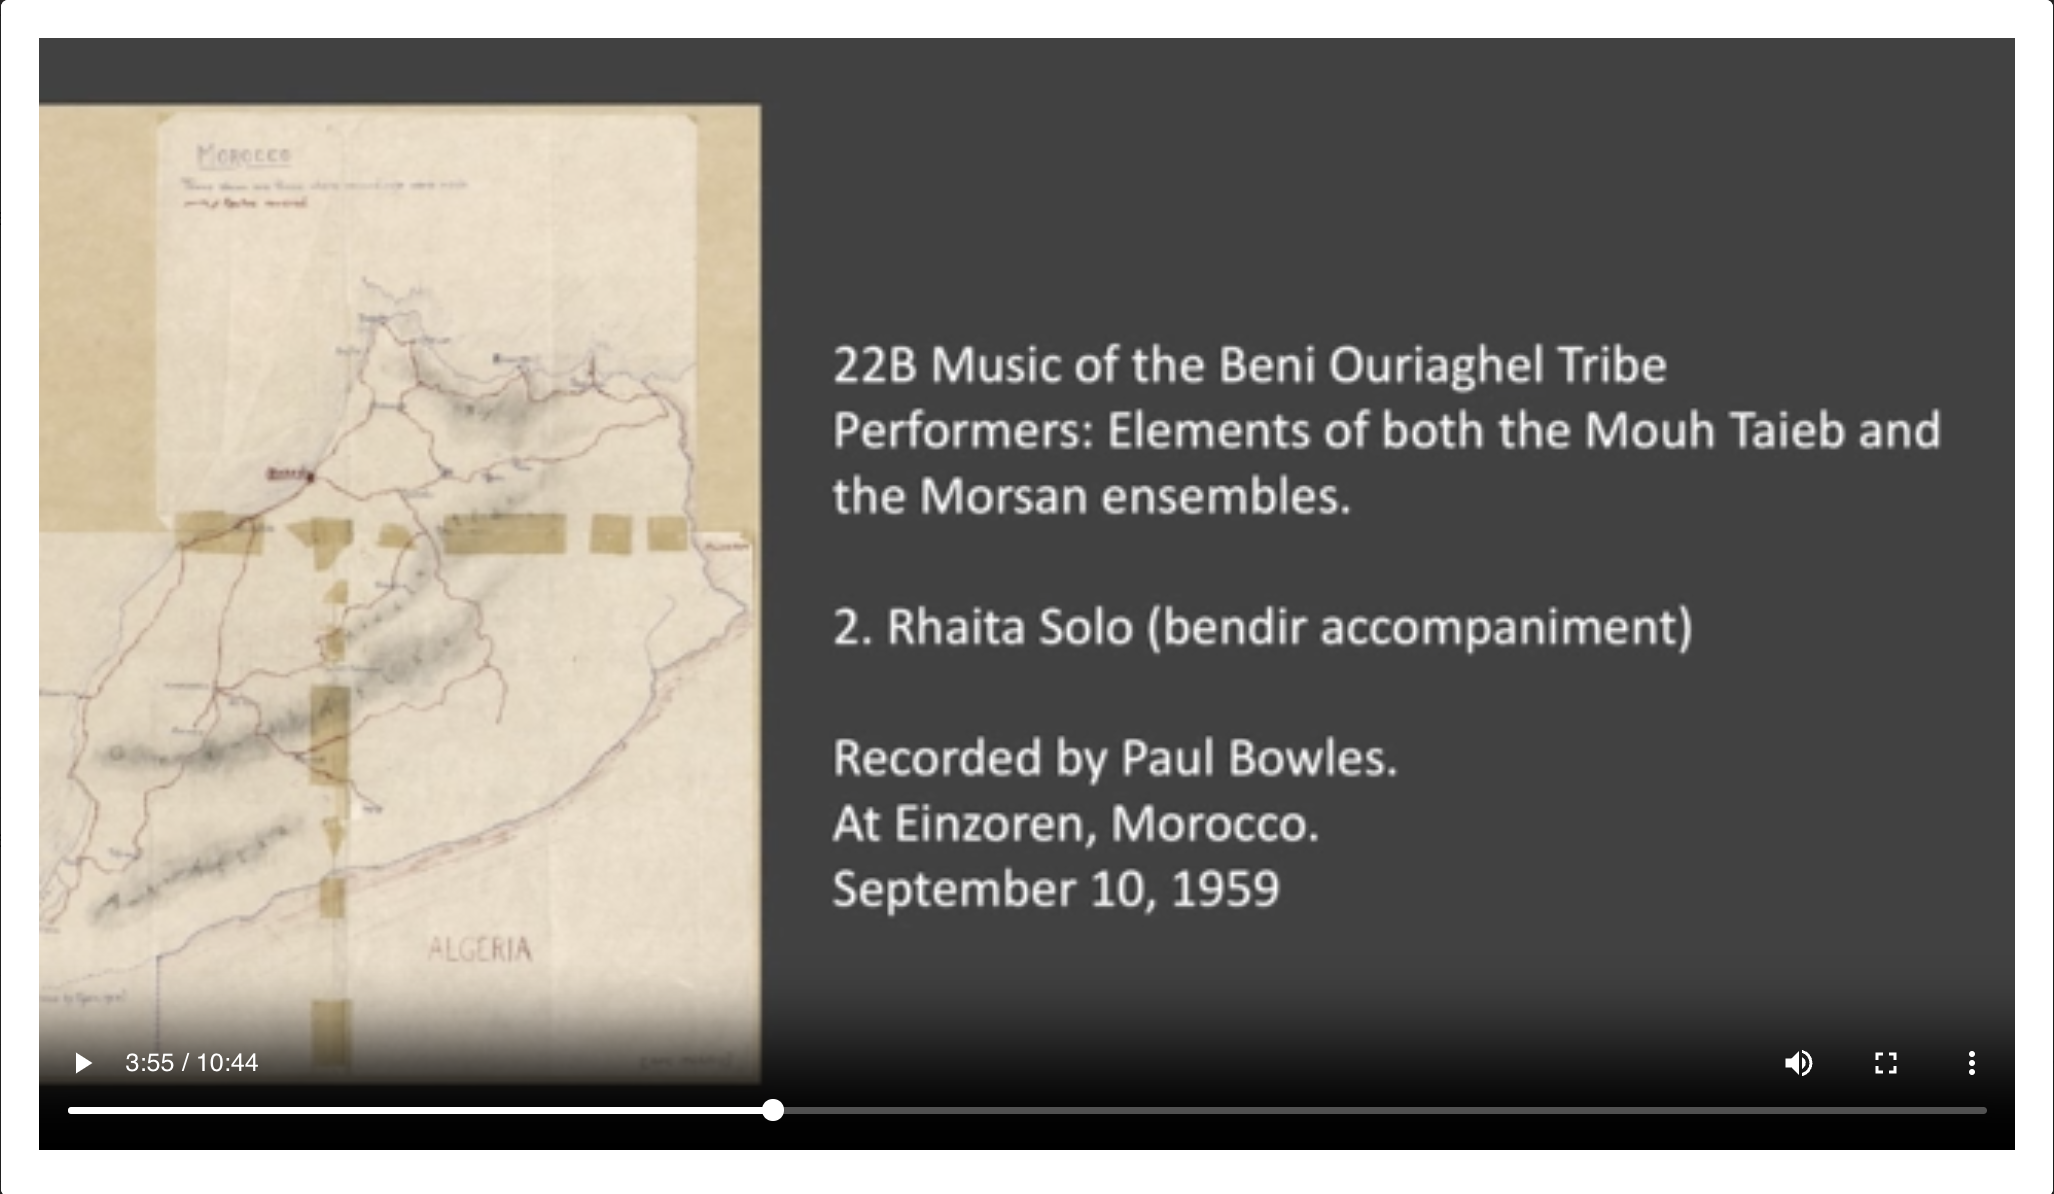 <p>22B 2. Rhaita Solo (bendir accompaniment) Music of the Beni Ouriaghel Tribe Performers: Elements of both the Mouh Taieb and the Morsan ensembles. Recorded by Paul Bowles at Einzoren, Morocco. September 10, 1959</p>